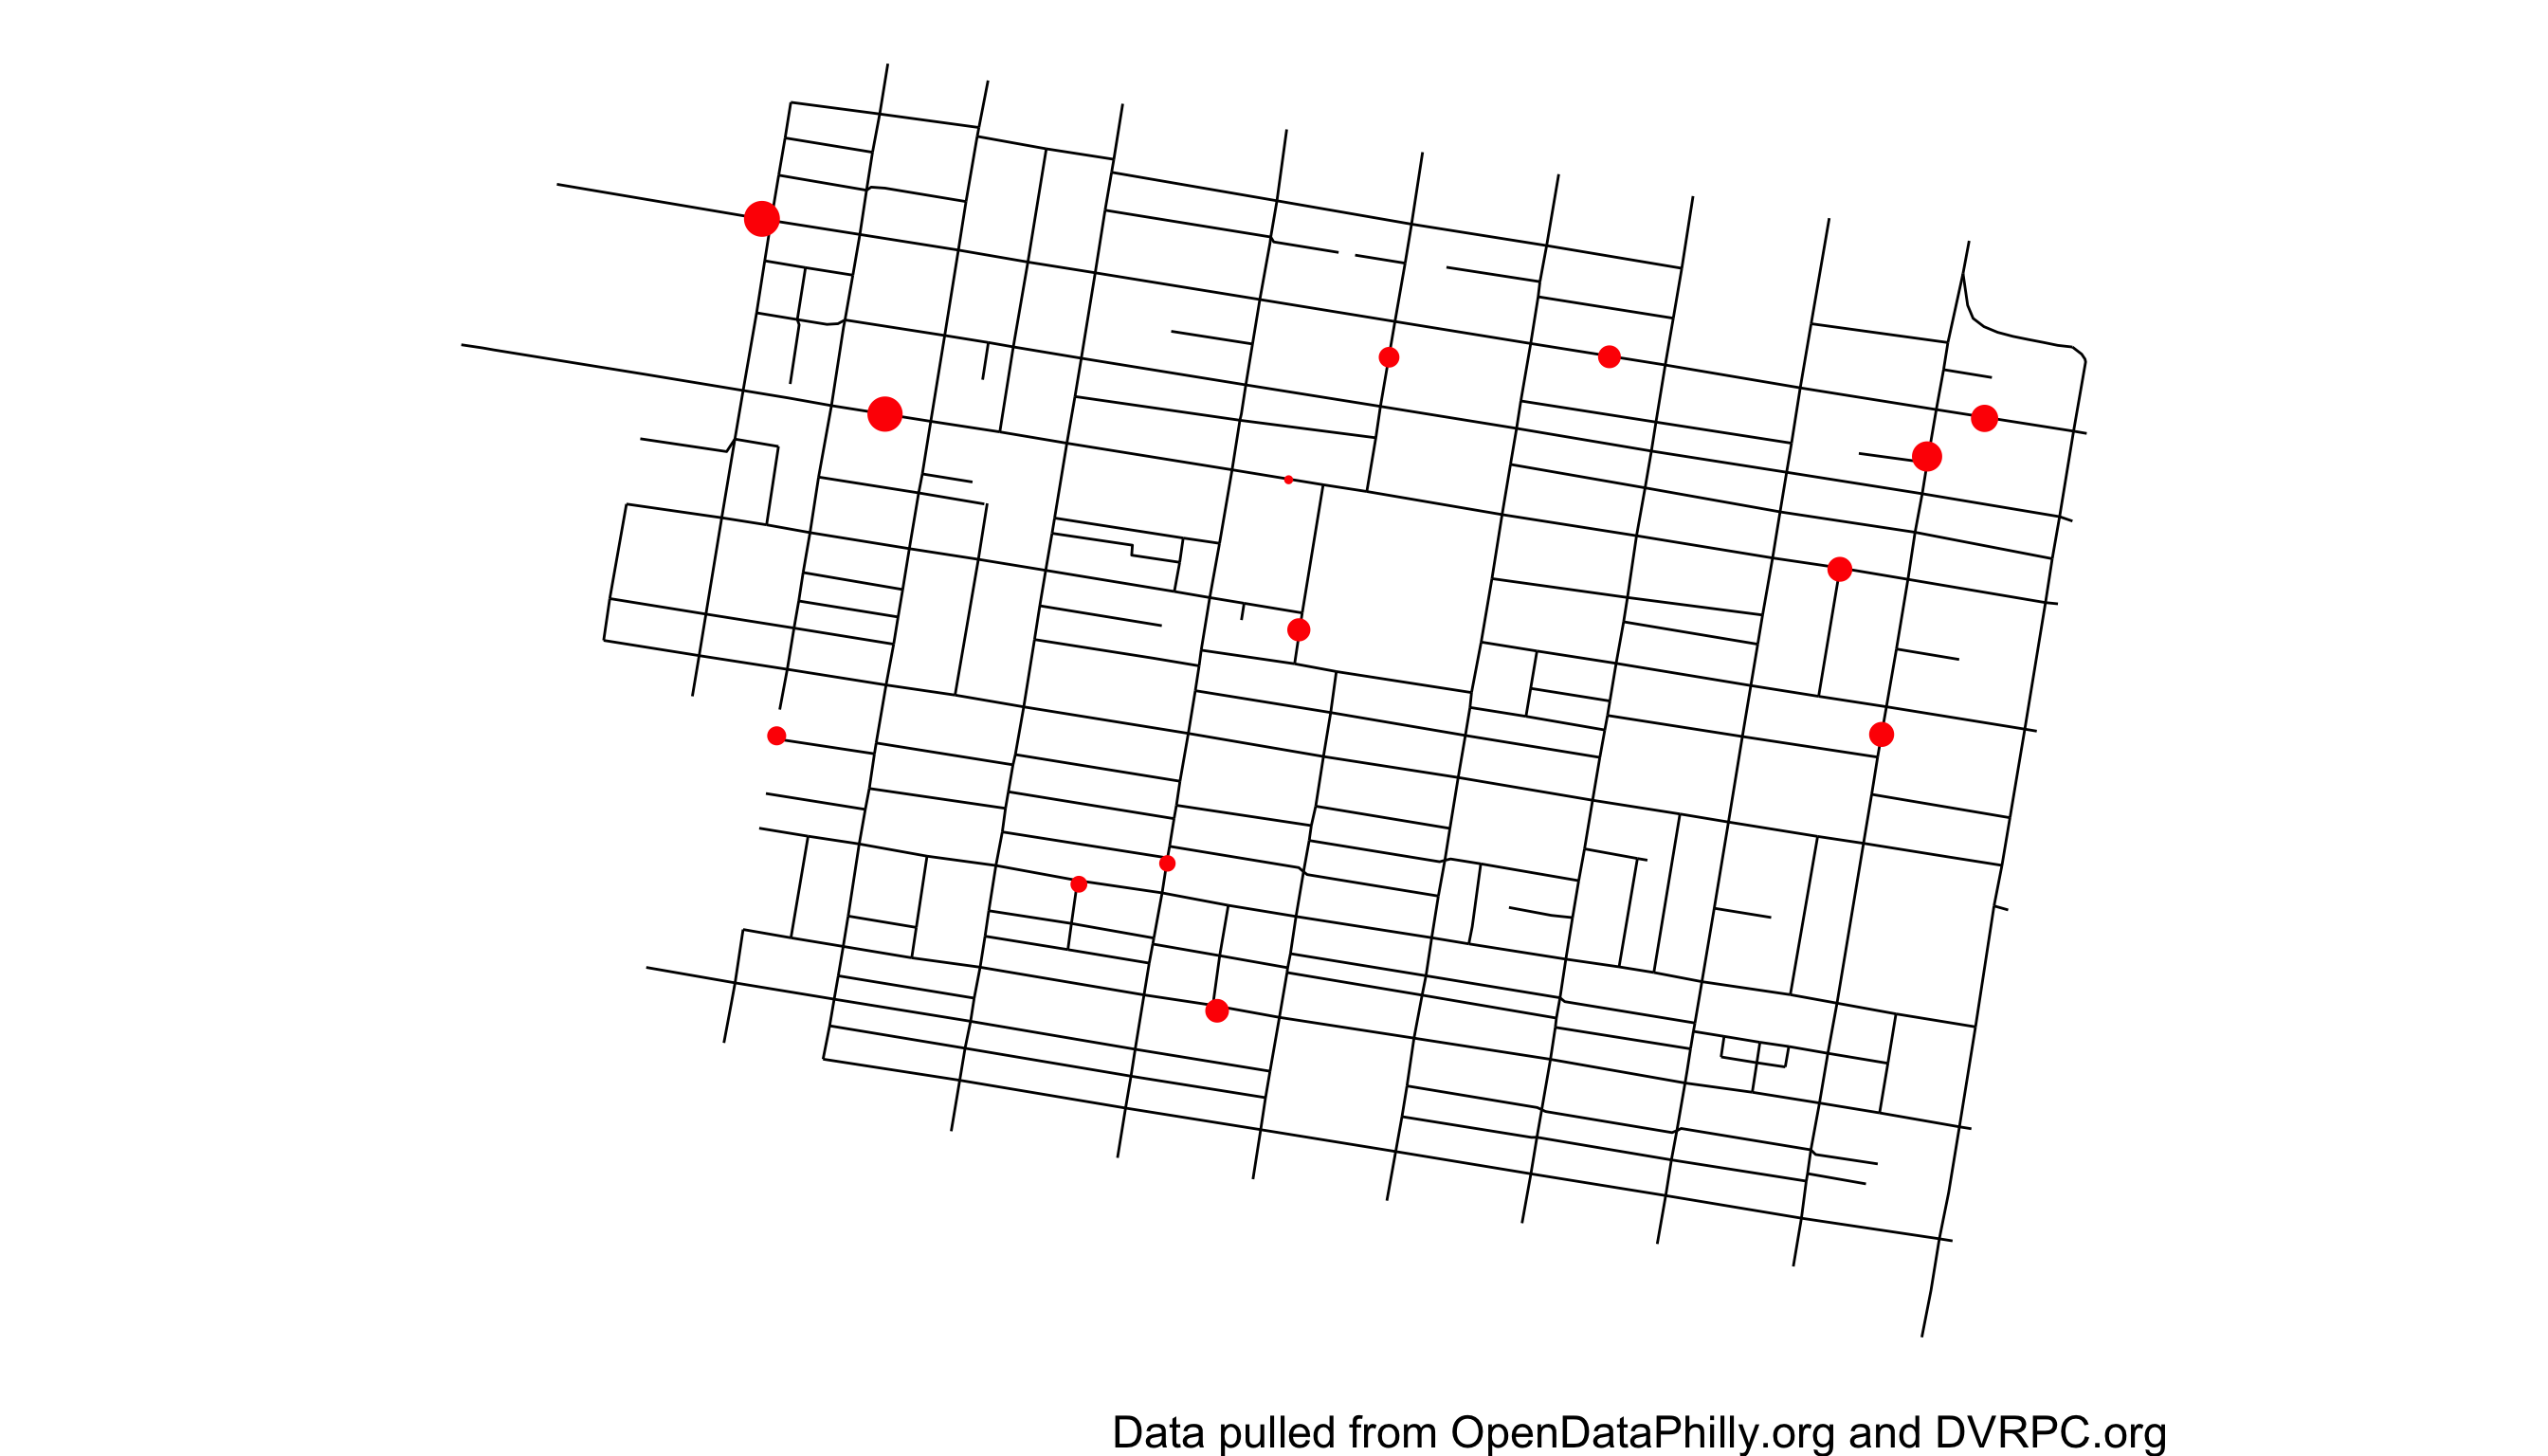 Observed 15 minute traffic rate on selected street blocks in Rittenhouse, Philadelphia from 2015-2020. Traffic rate is proportional to point size.